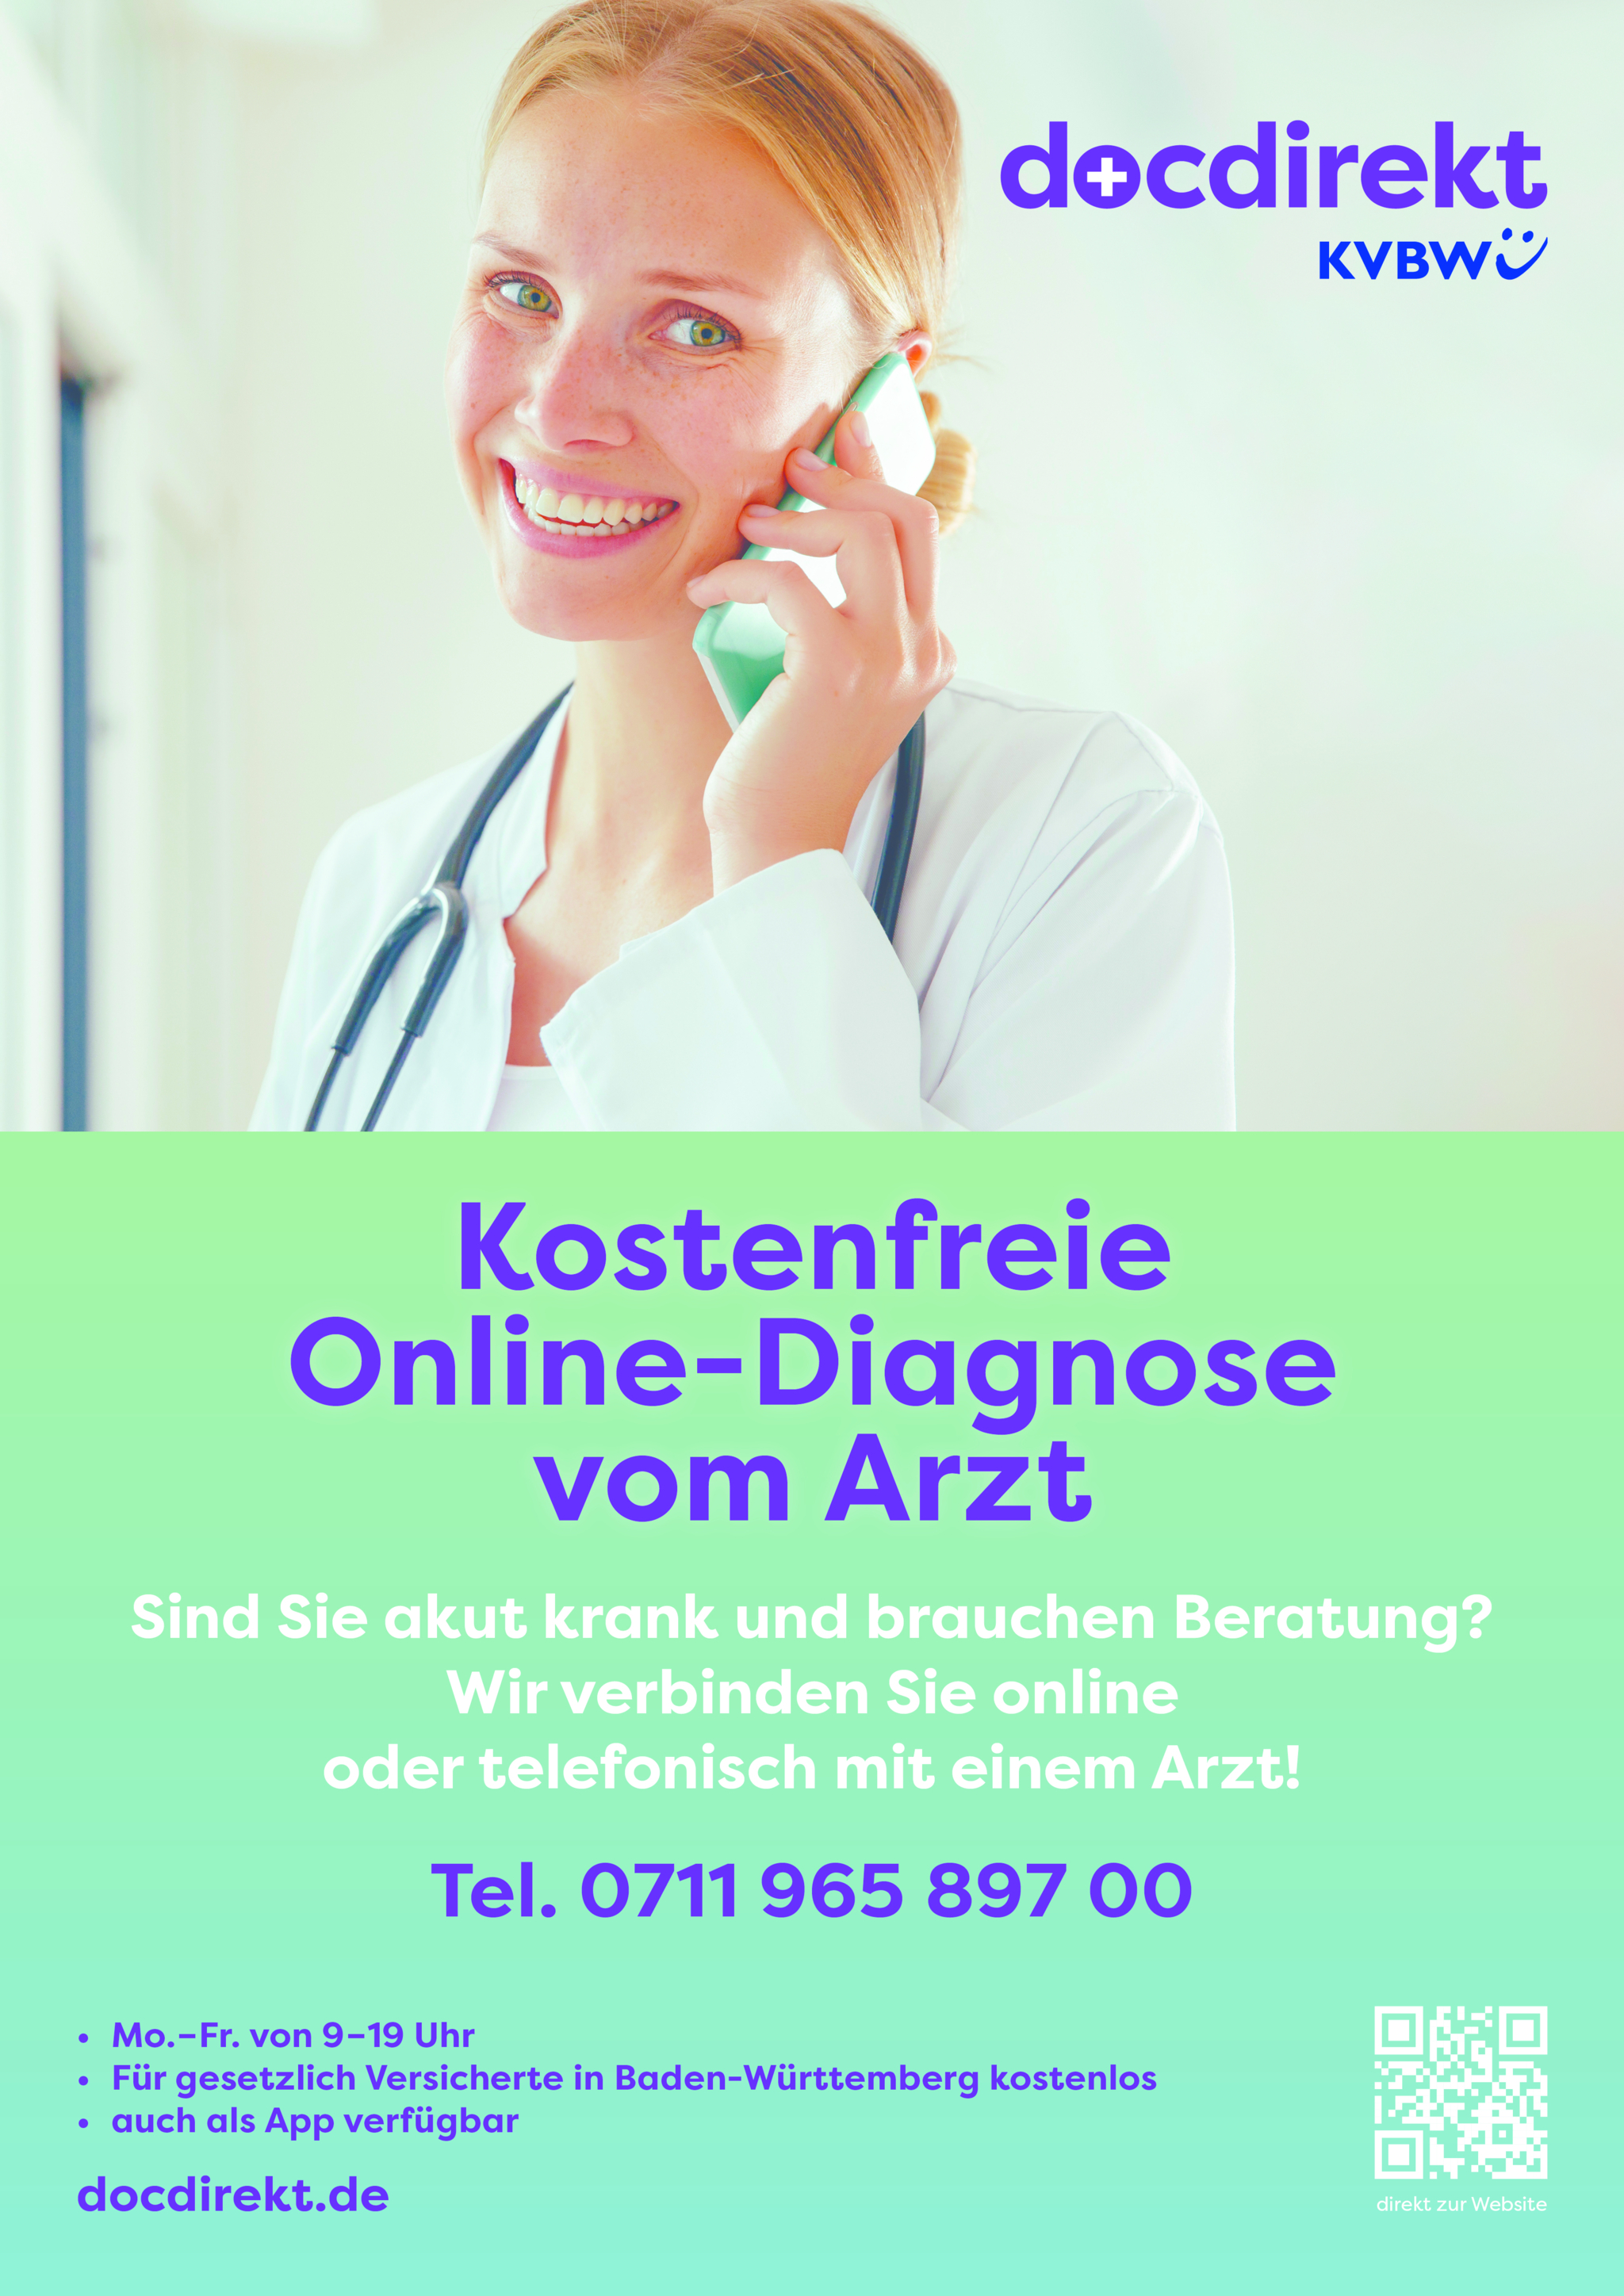 Docdirekt poster showing a doctor on the phone.